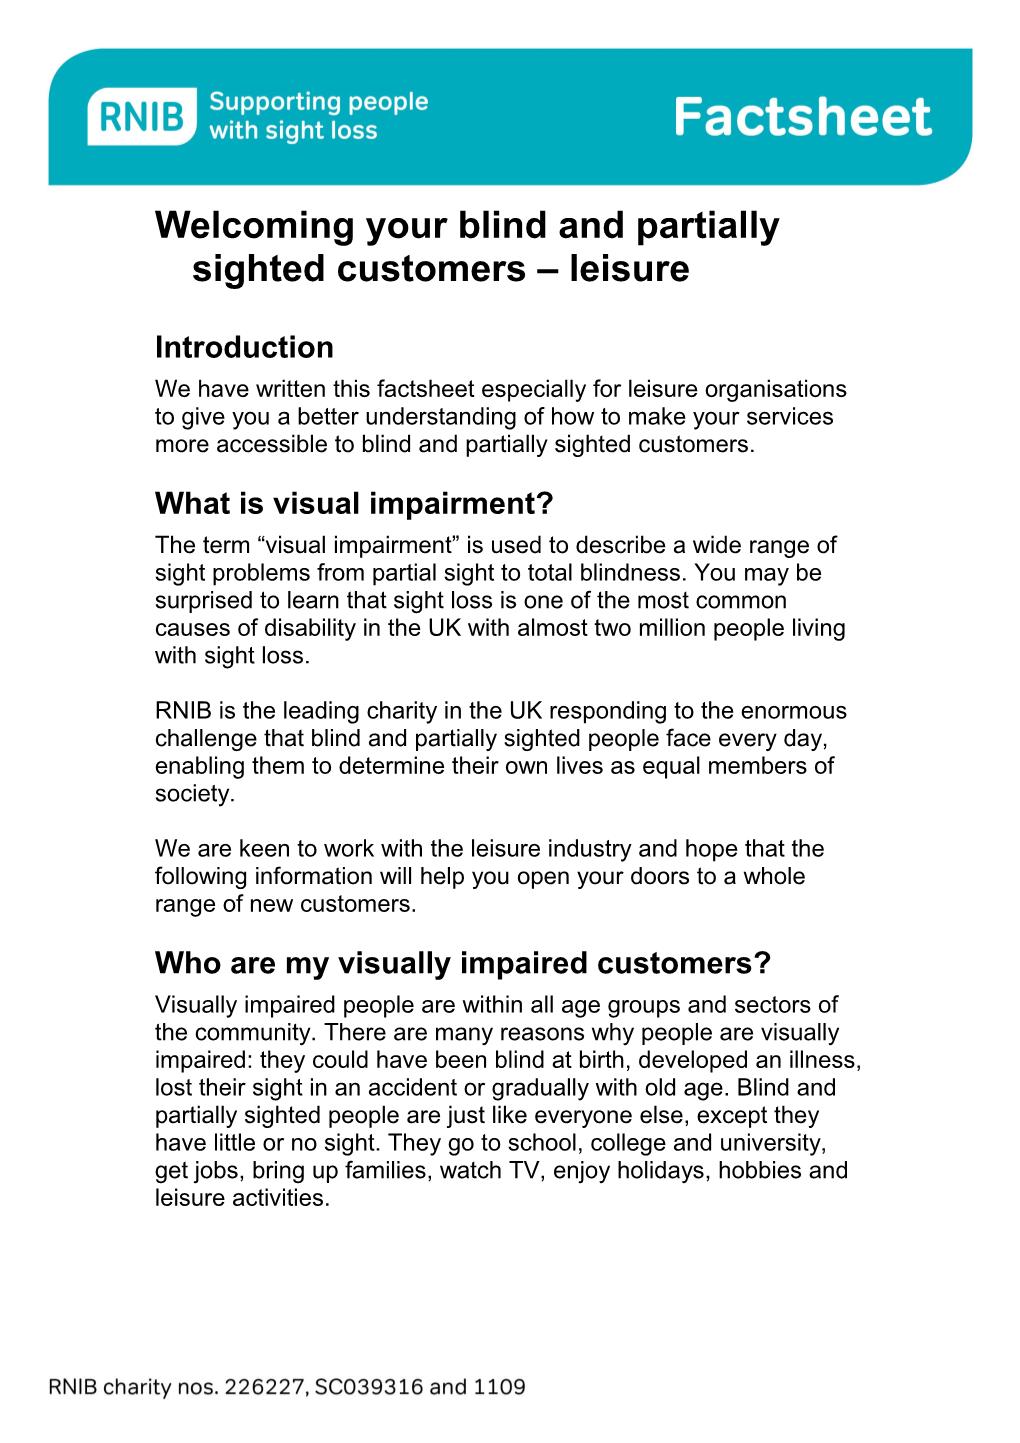 Welcoming Your Blind and Partially Sighted Customers